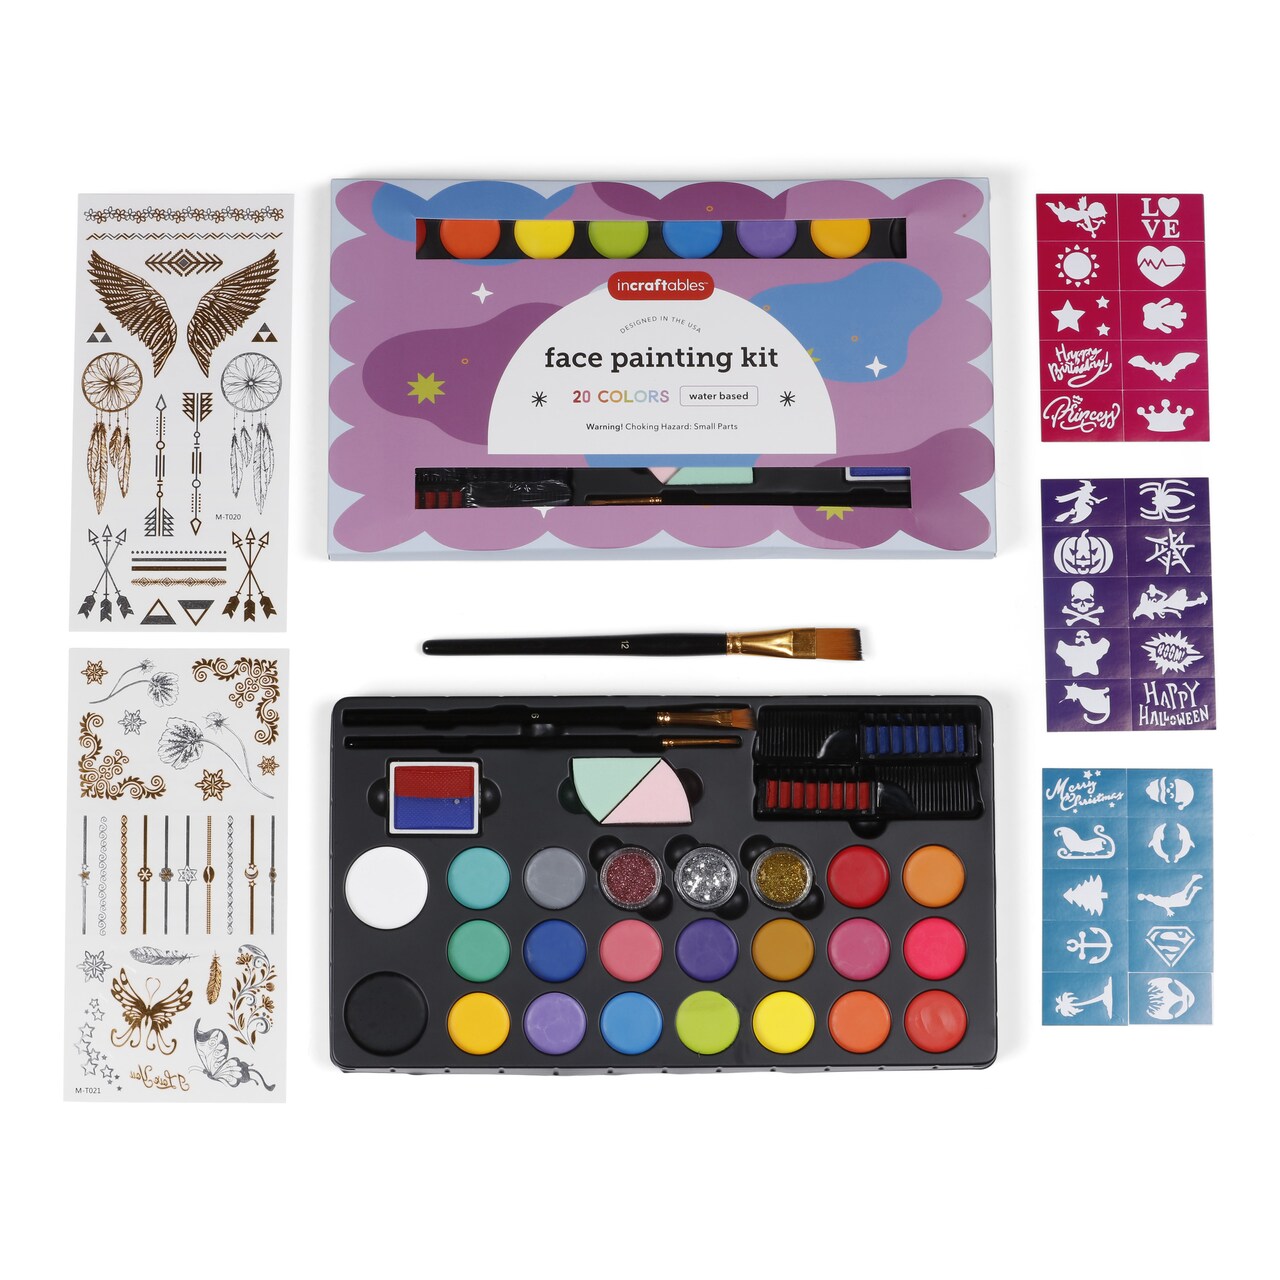 Incraftables Face Painting Kit for Kids &#x26; Adults. Face Painting Kit for Kids Party w/ Colors, Stencils, Brushes, Glitters &#x26; More. Non-Toxic Water Based Face Paint Kit. Easy to Use DIY Facepaint Kit